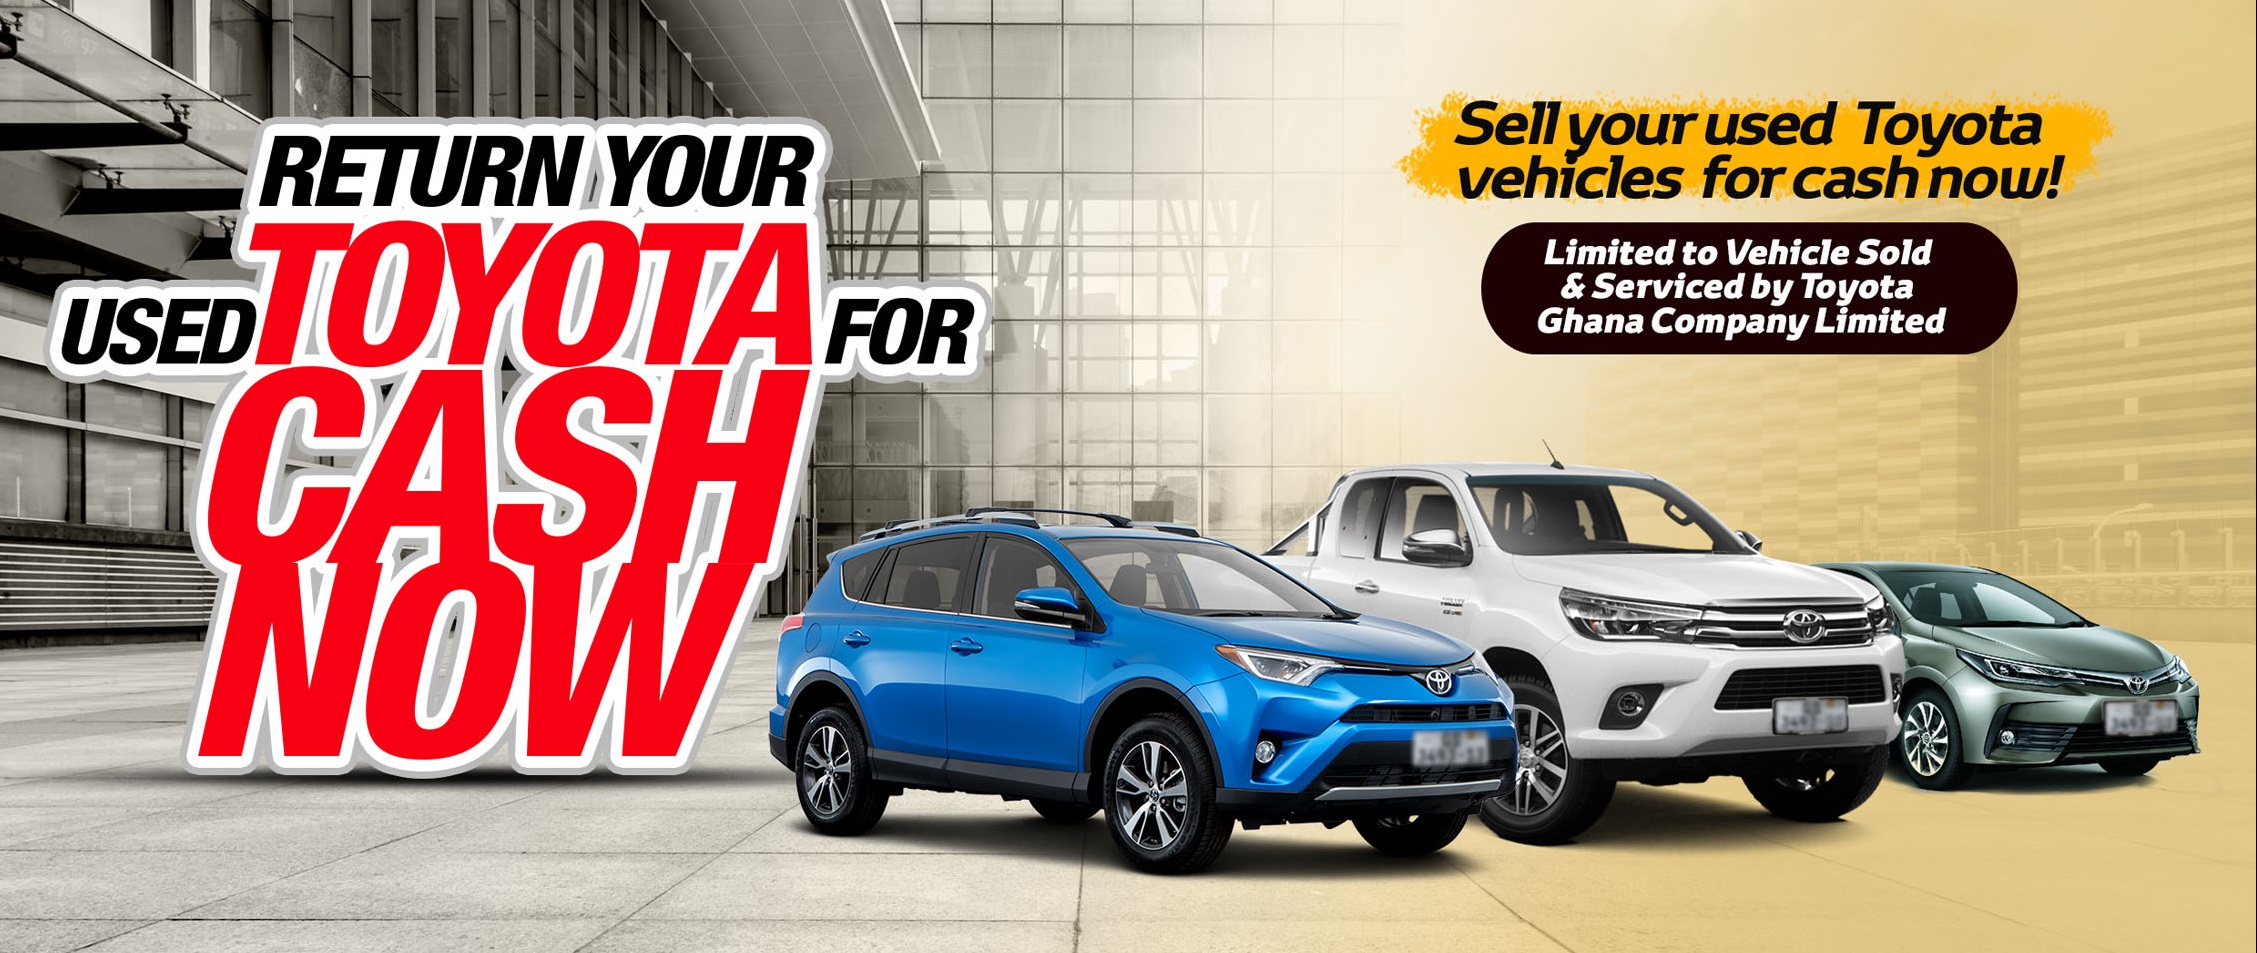 Selling your car made easy with Toyota Ghana